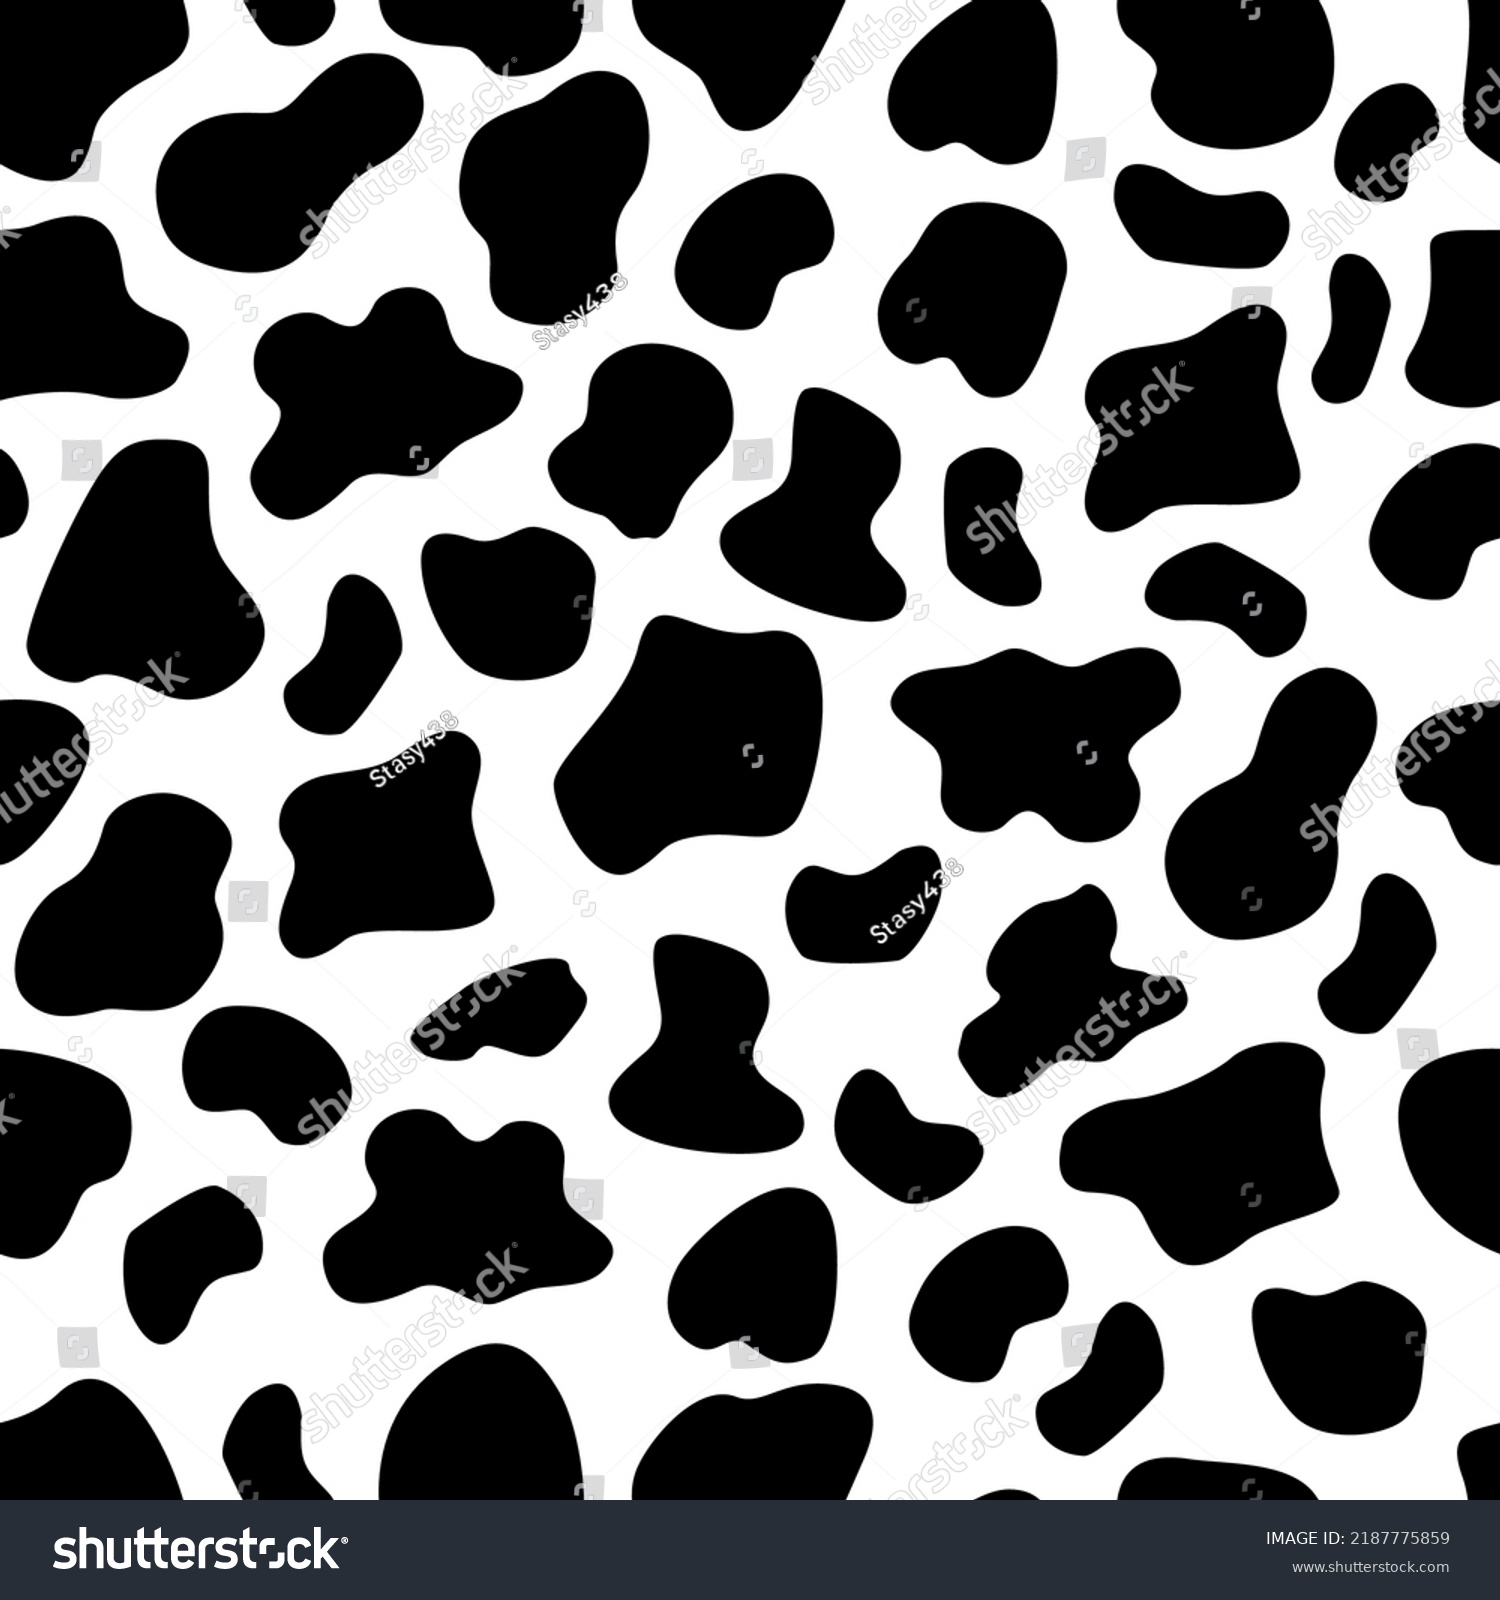 SVG of Dalmatian or cow seamless black and white pattern. Animal spot print, cow or dalmatian skin texture. Seamless vector background. svg